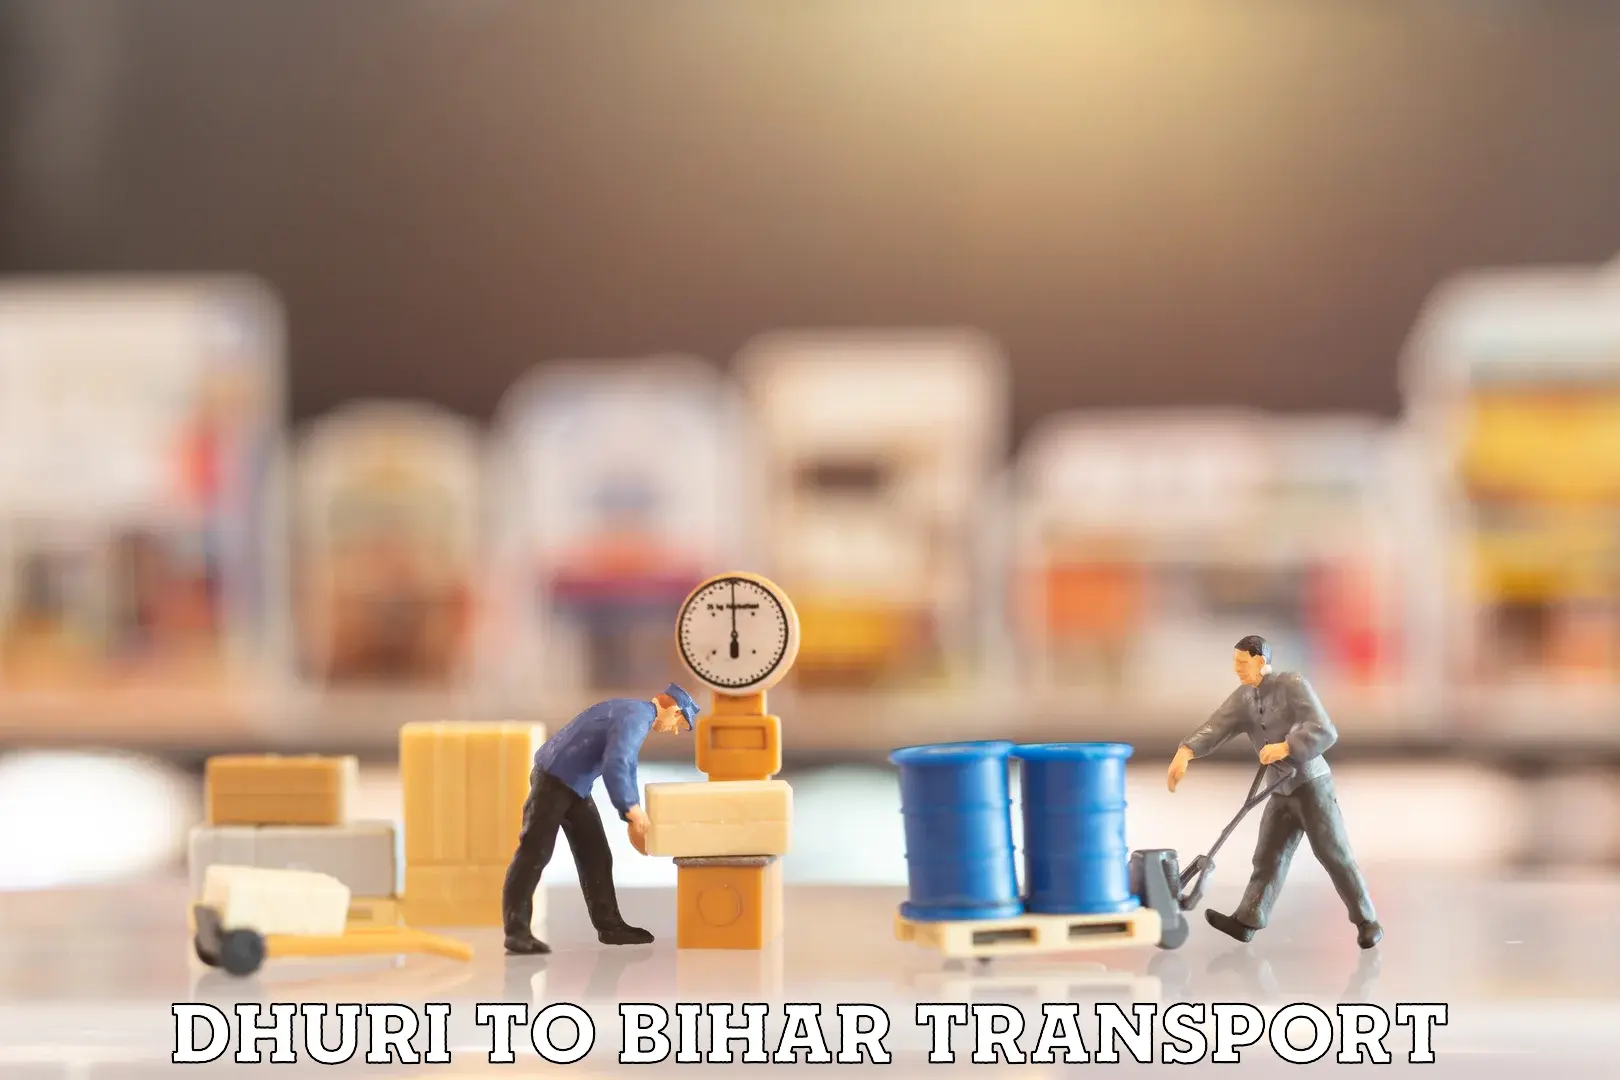 Nationwide transport services Dhuri to Patna